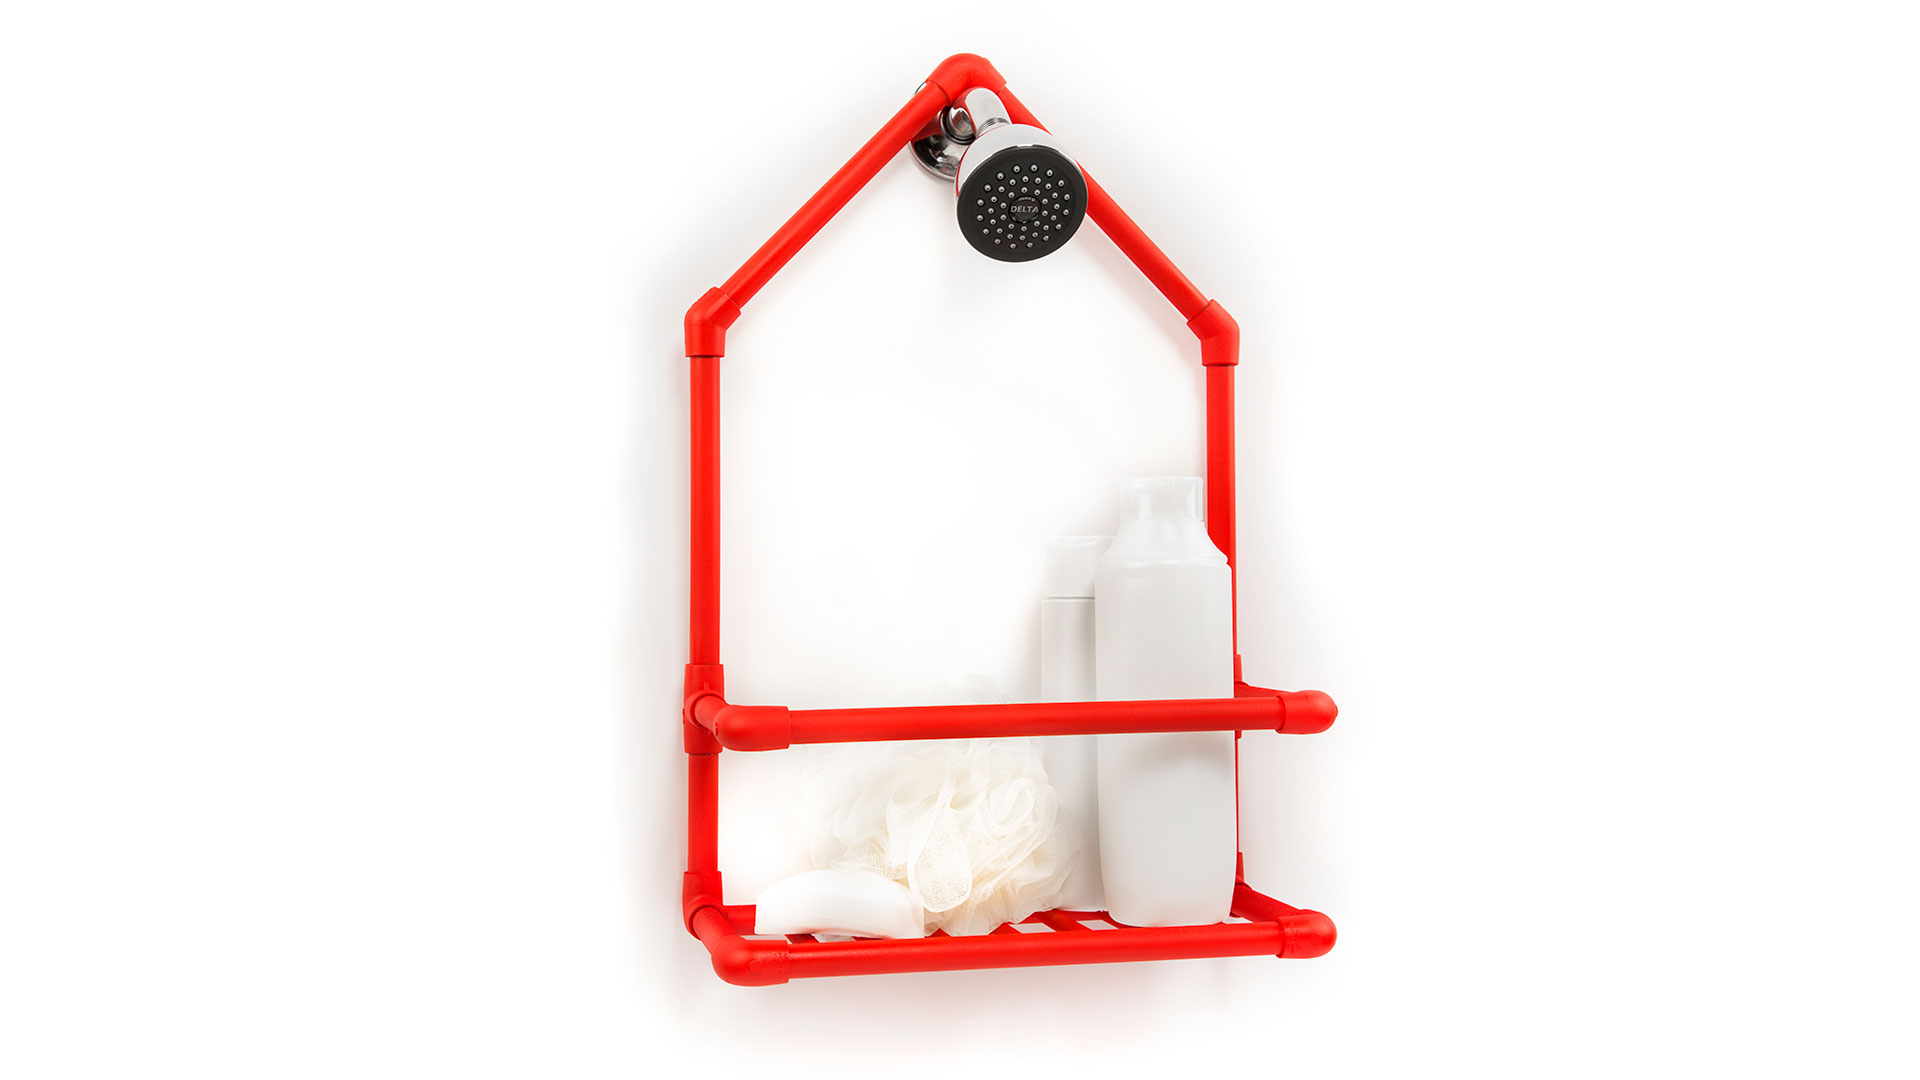 Red cylindrical piping assembled into a small shelf that comes to point above to hang over shower head, assorted shower caddy accessories on shelf